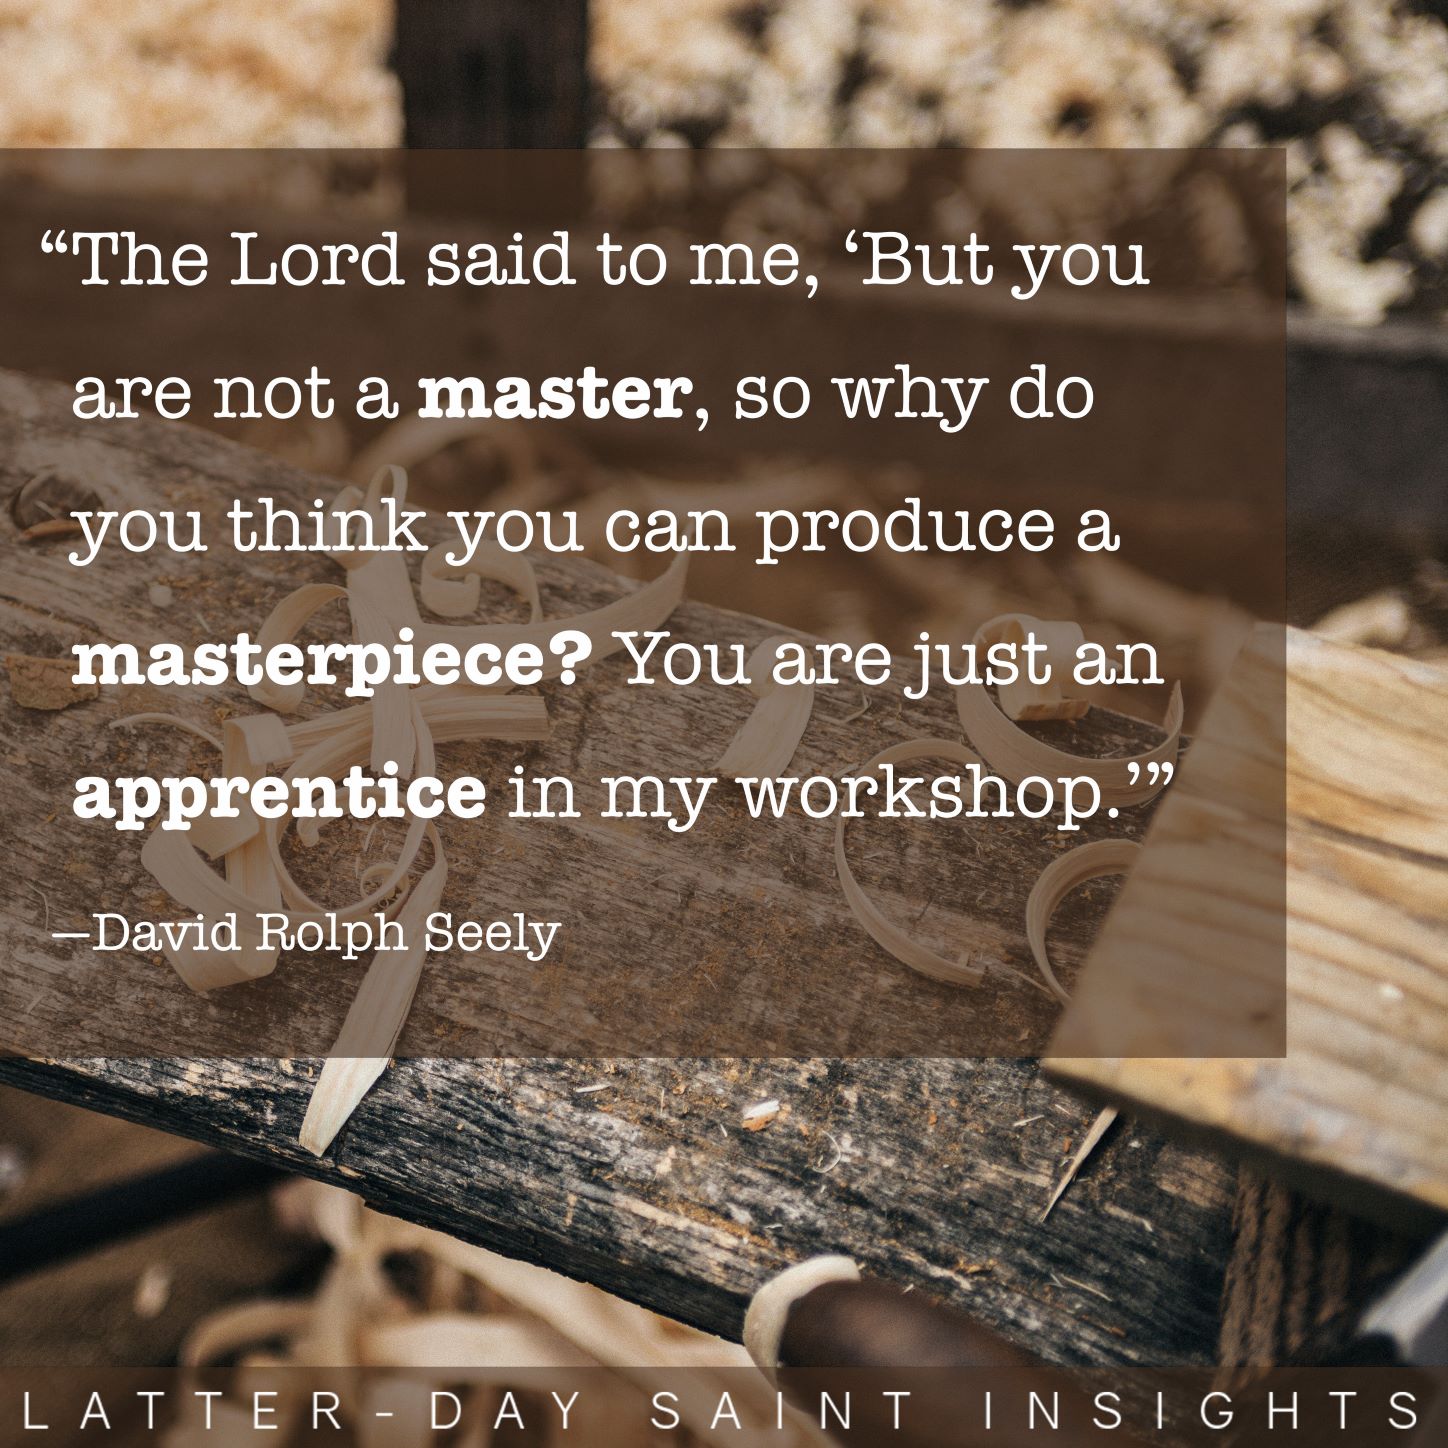 "The Lord said to me, 'But you are not a master, so why do you think you can produce a masterpiece? You are just an apprentice in my workshop.'" - David Rolph Seely